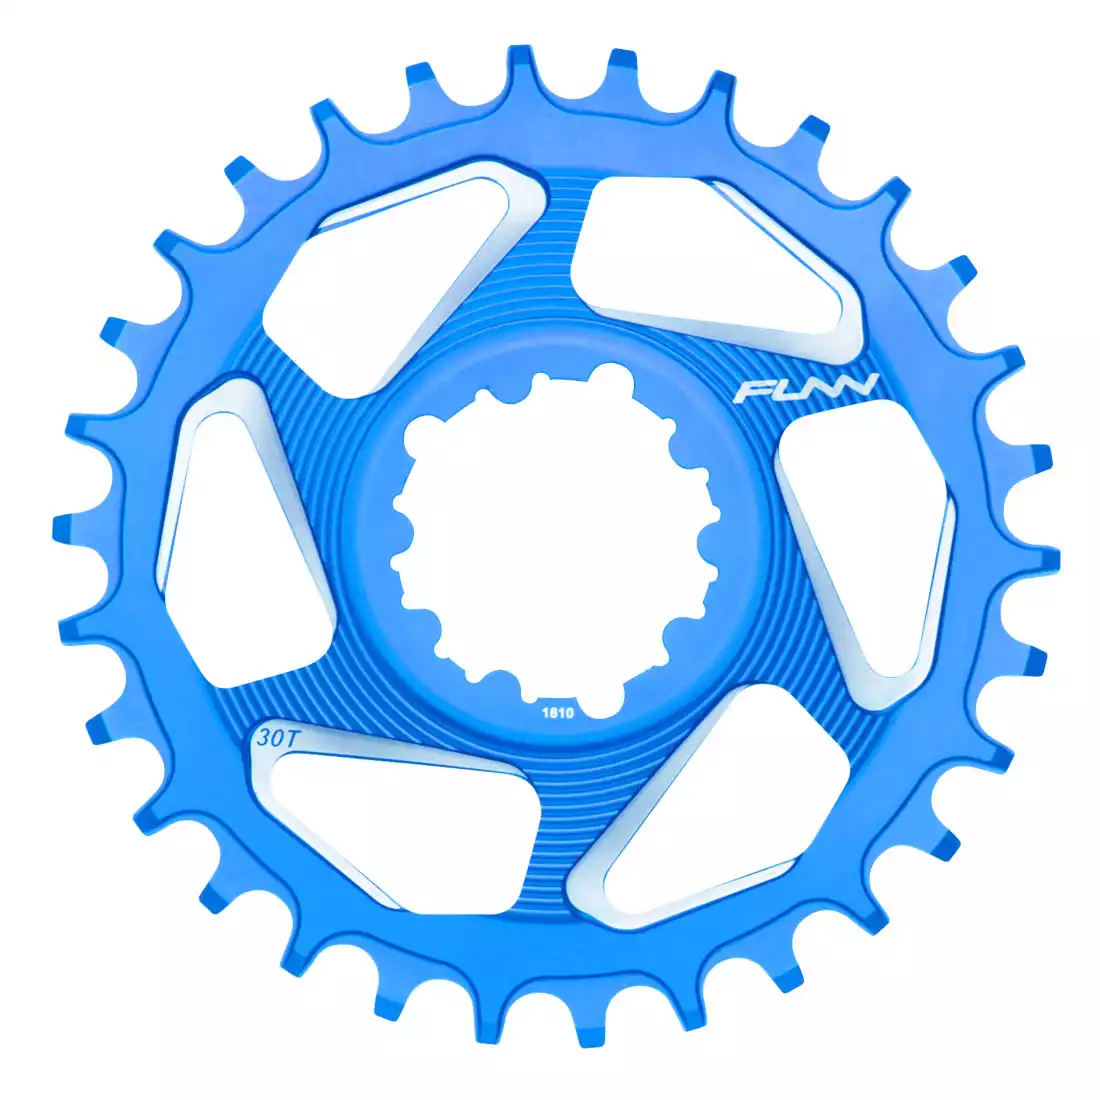 FUNN SOLO DX 32T NARROW- WIDE bicycle sprocket to crank blue